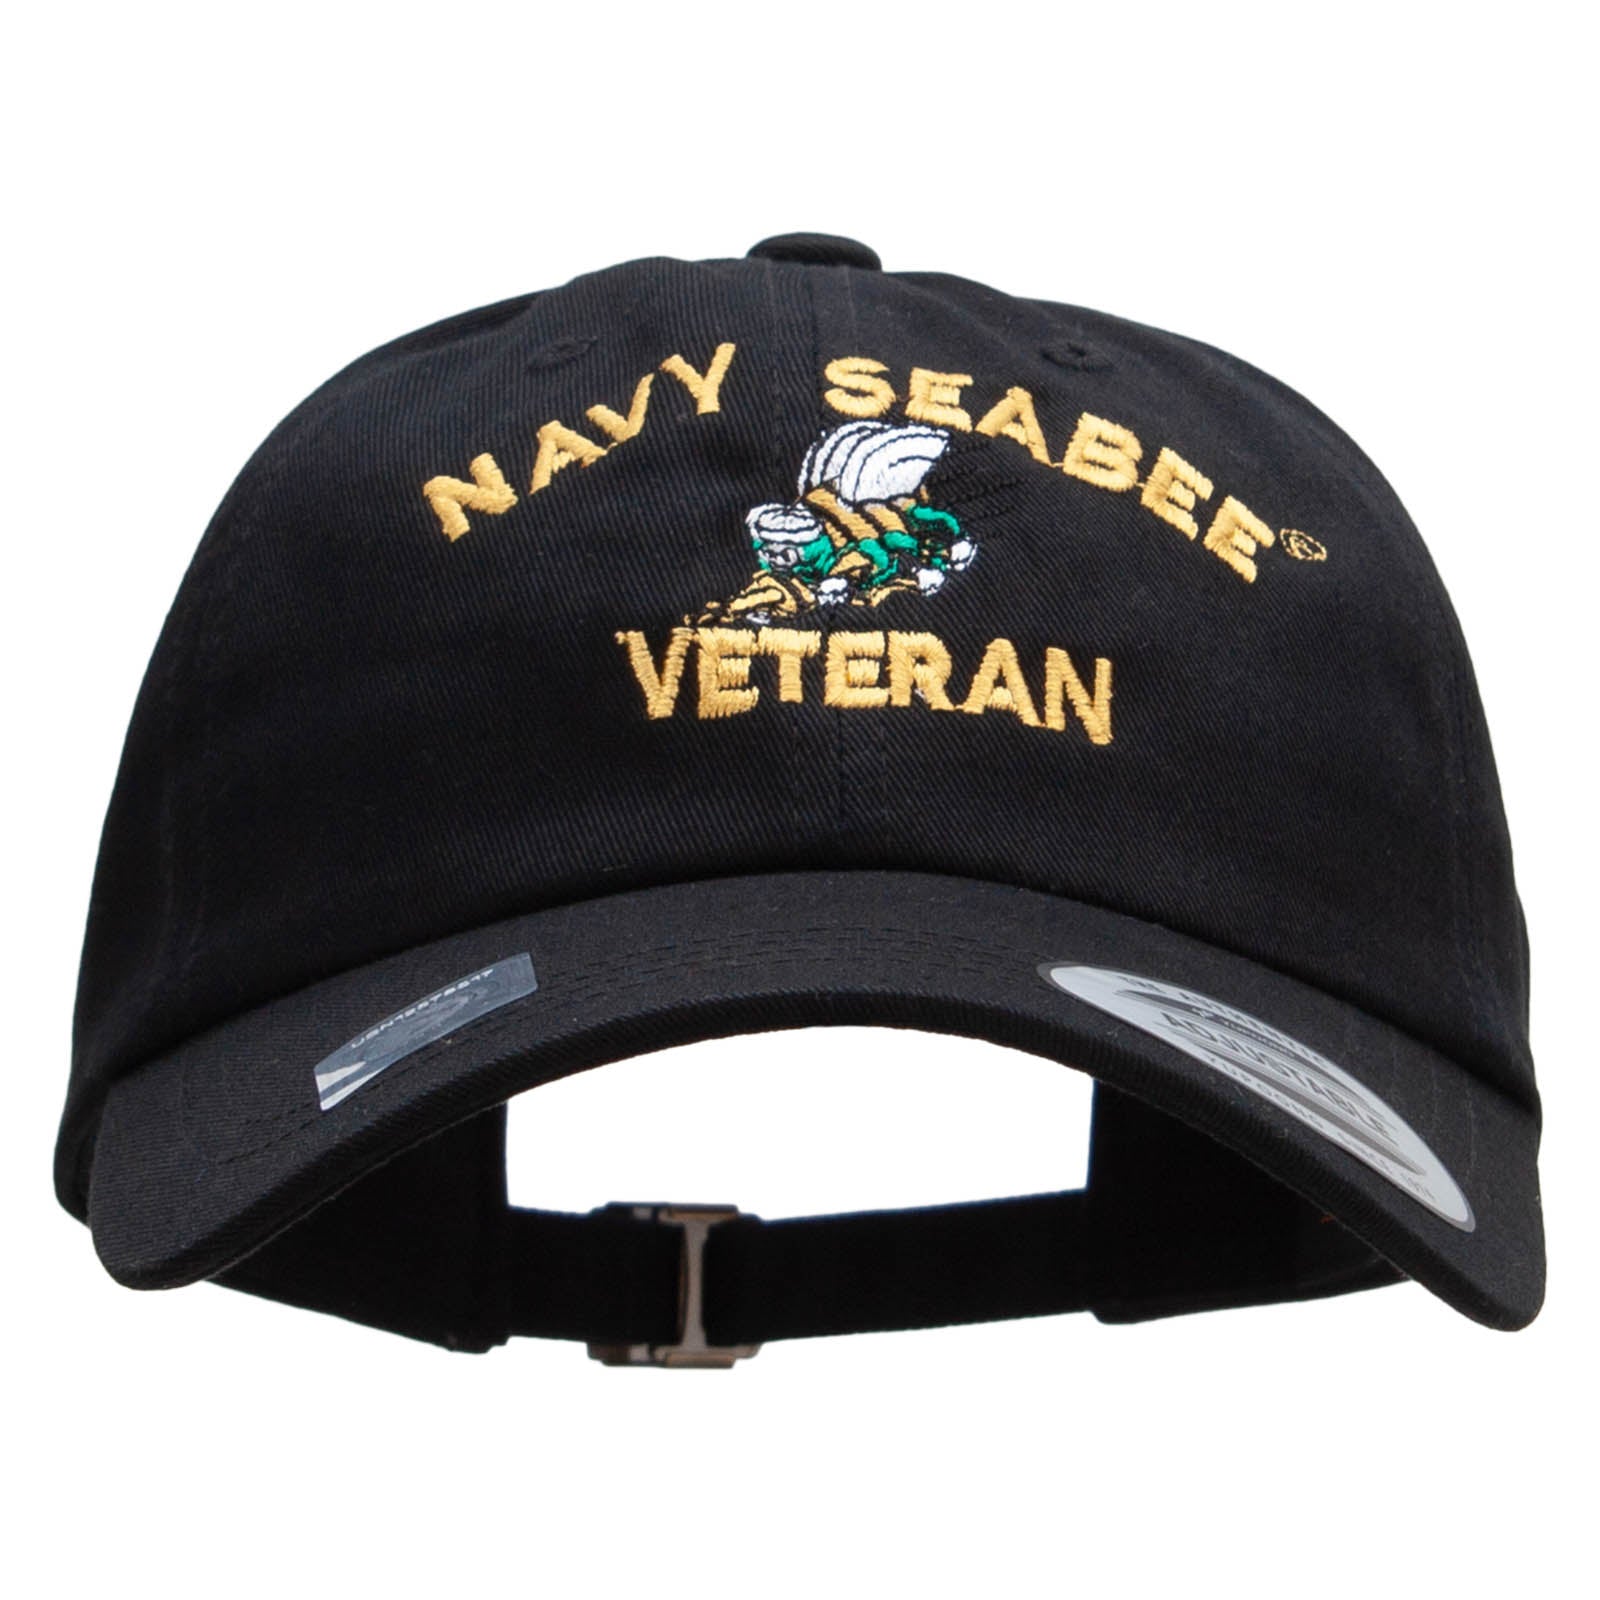 Licensed United States Navy Seabee Veteran Unstructured Low Profile 6 panel Cotton Cap - Black OSFM